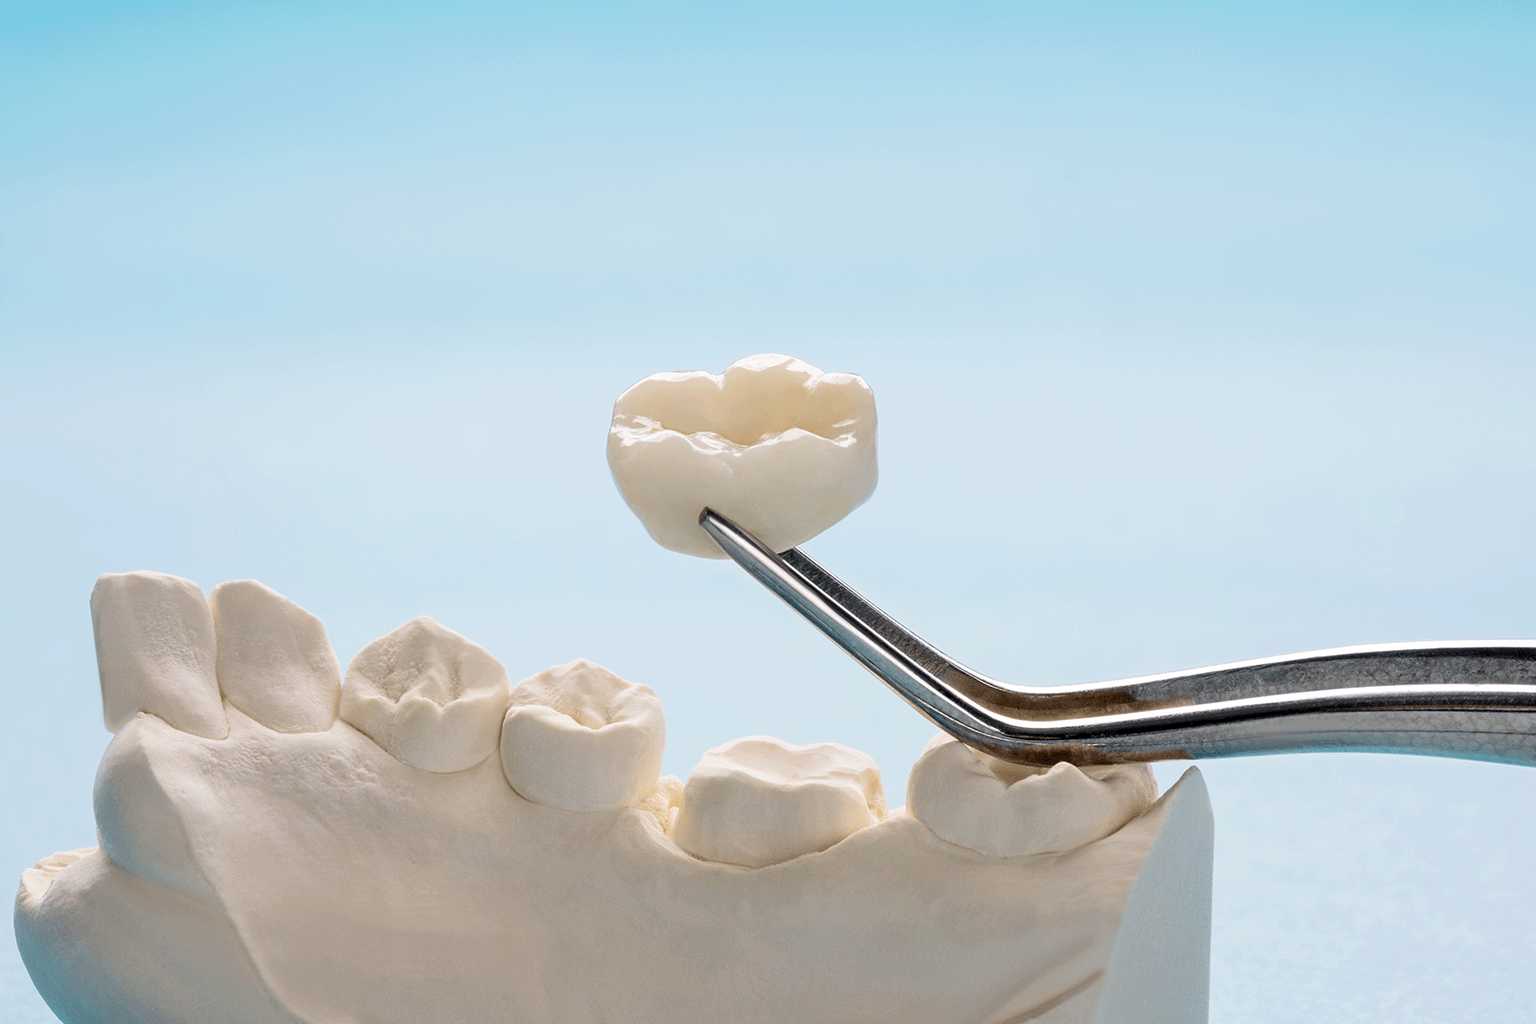 dental crown being placed on a jaw model